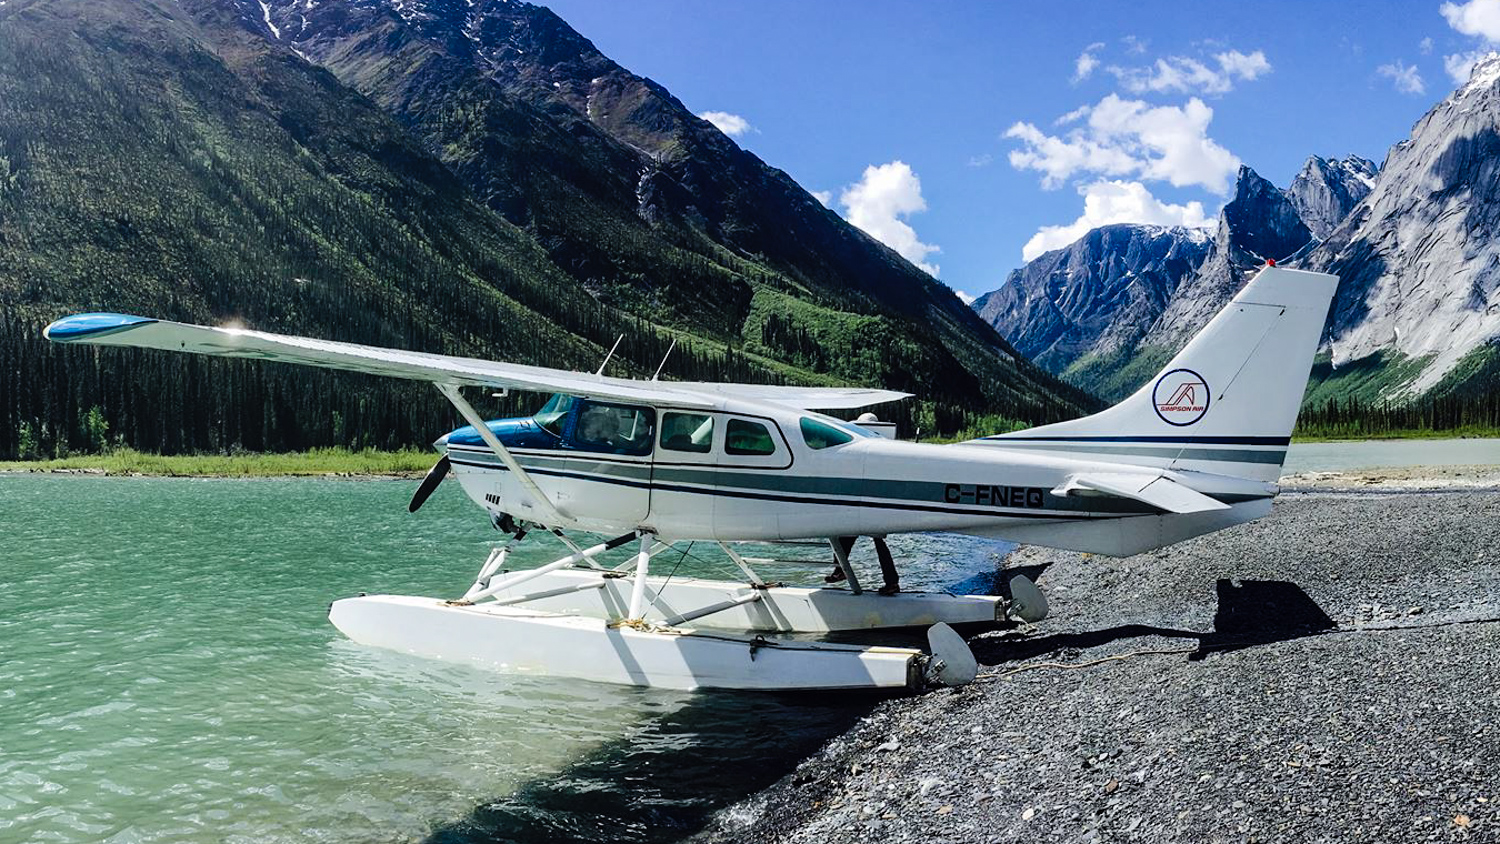 A Simpson Air-registered Cessna 206 is seen during a previous tour in a photo posted by the company to its Facebook page